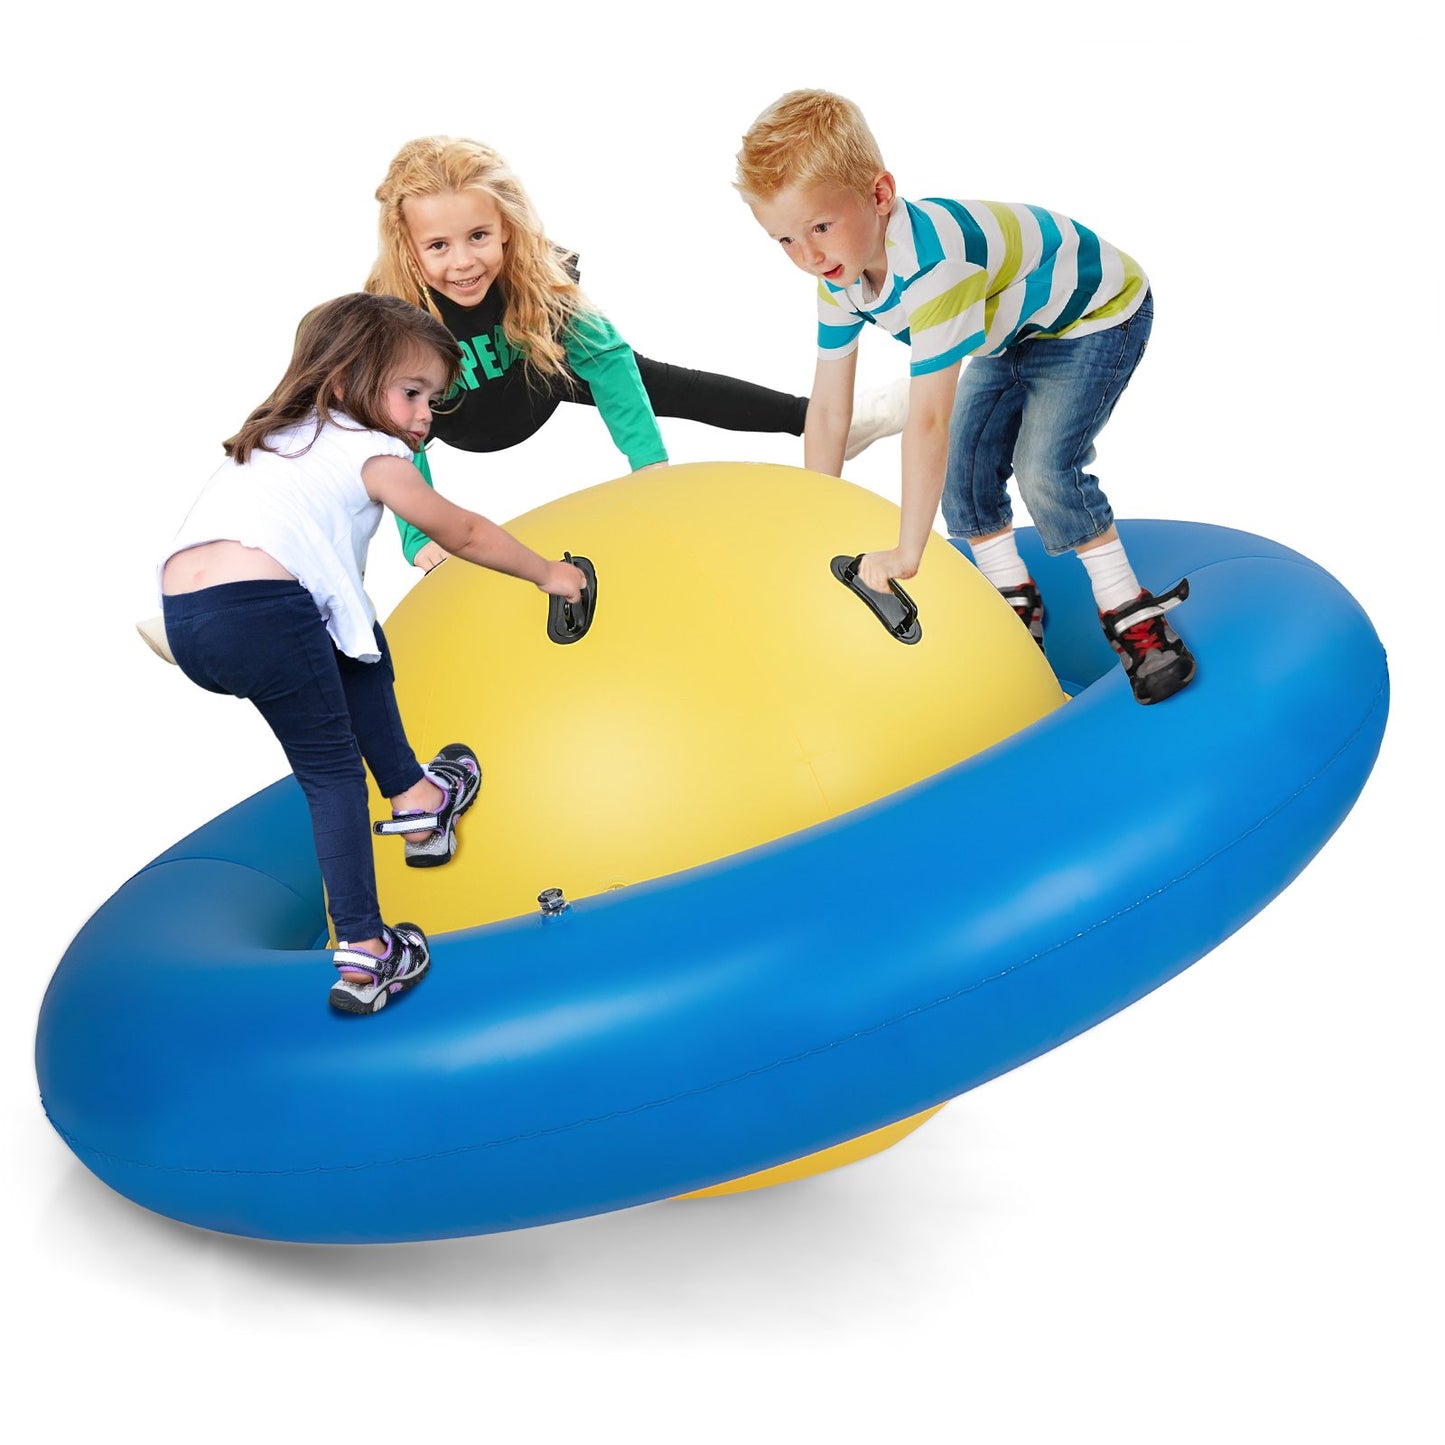 7.5 Foot Giant Inflatable Dome Rocker Bouncer with 6 Built-in Handles for Kids, Blue at Gallery Canada